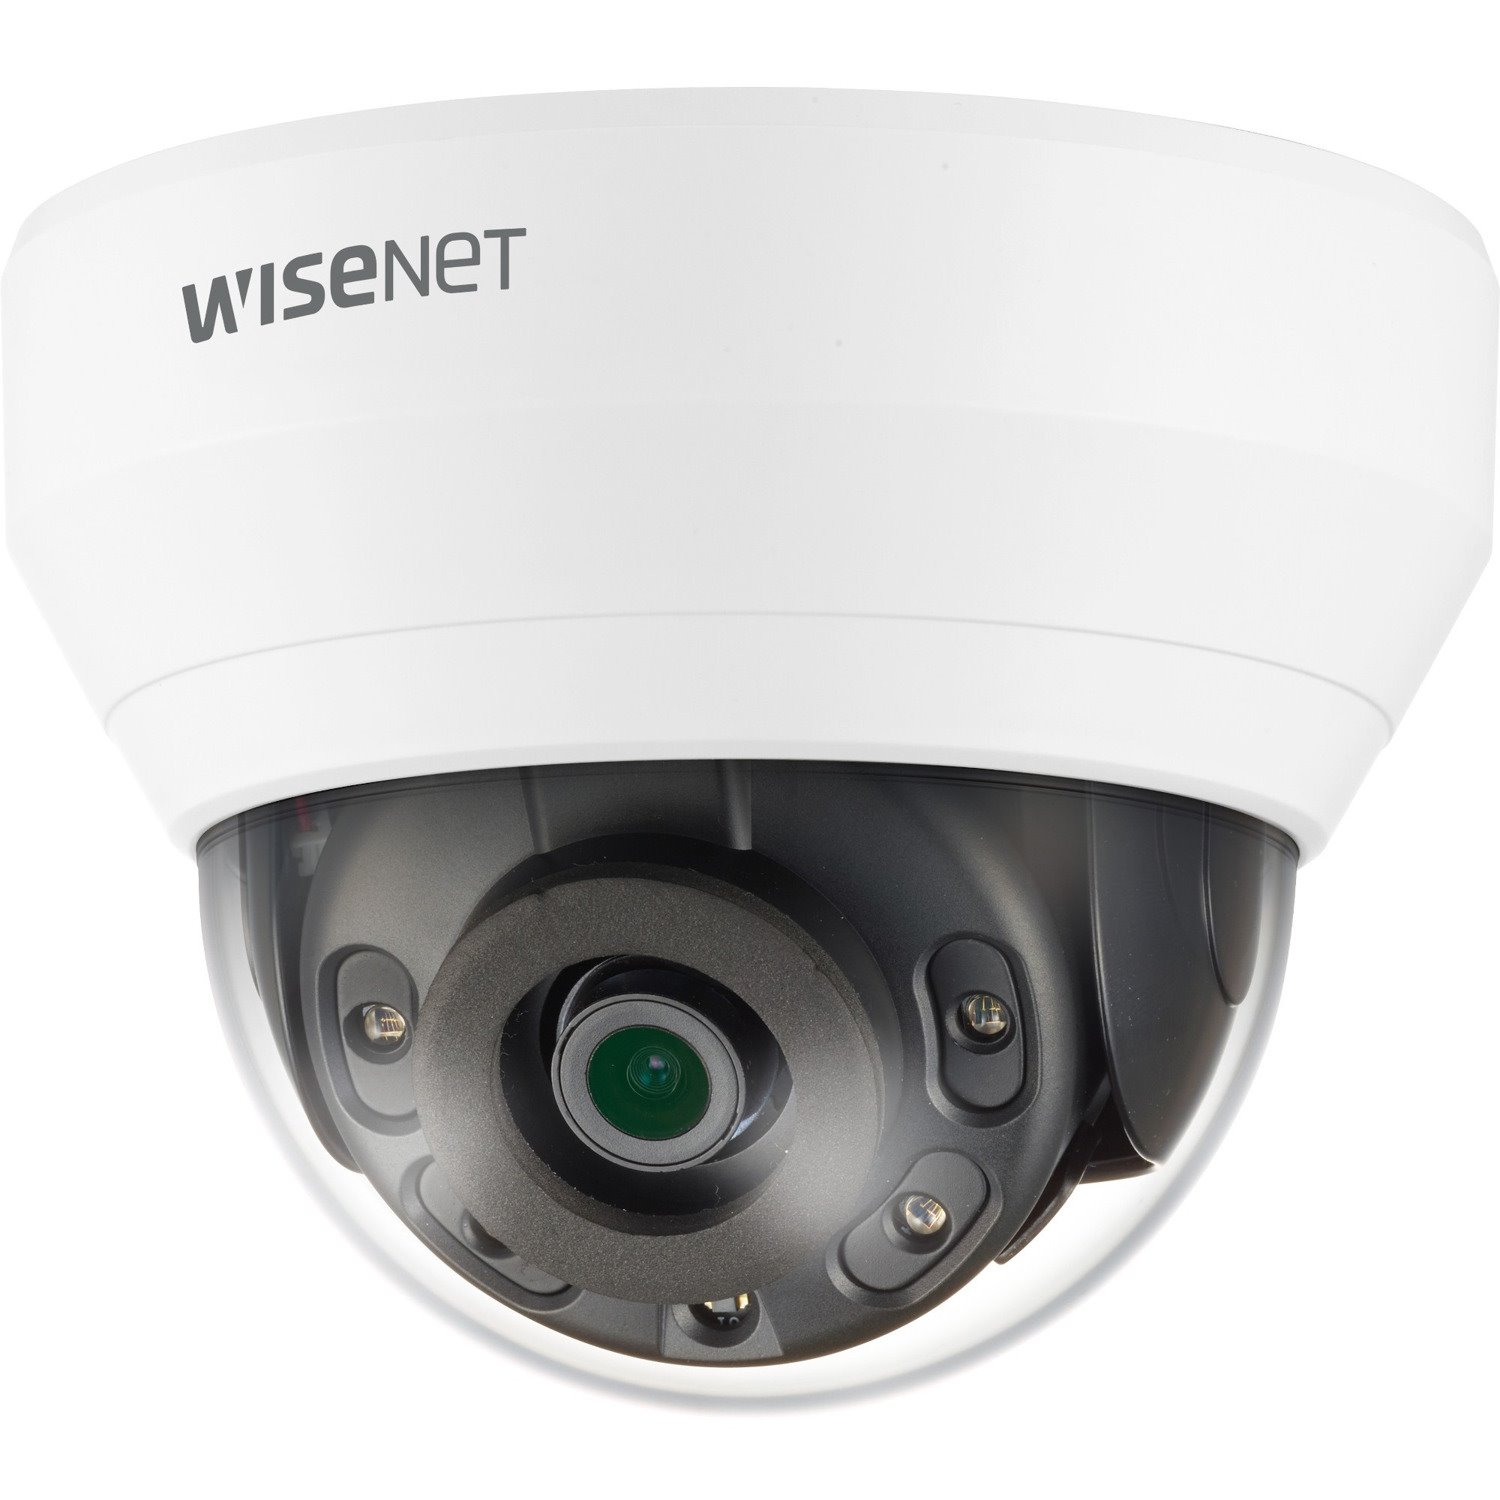 Wisenet QND-6012R1 2 Megapixel Indoor/Outdoor Full HD Network Camera - Color - Dome - White